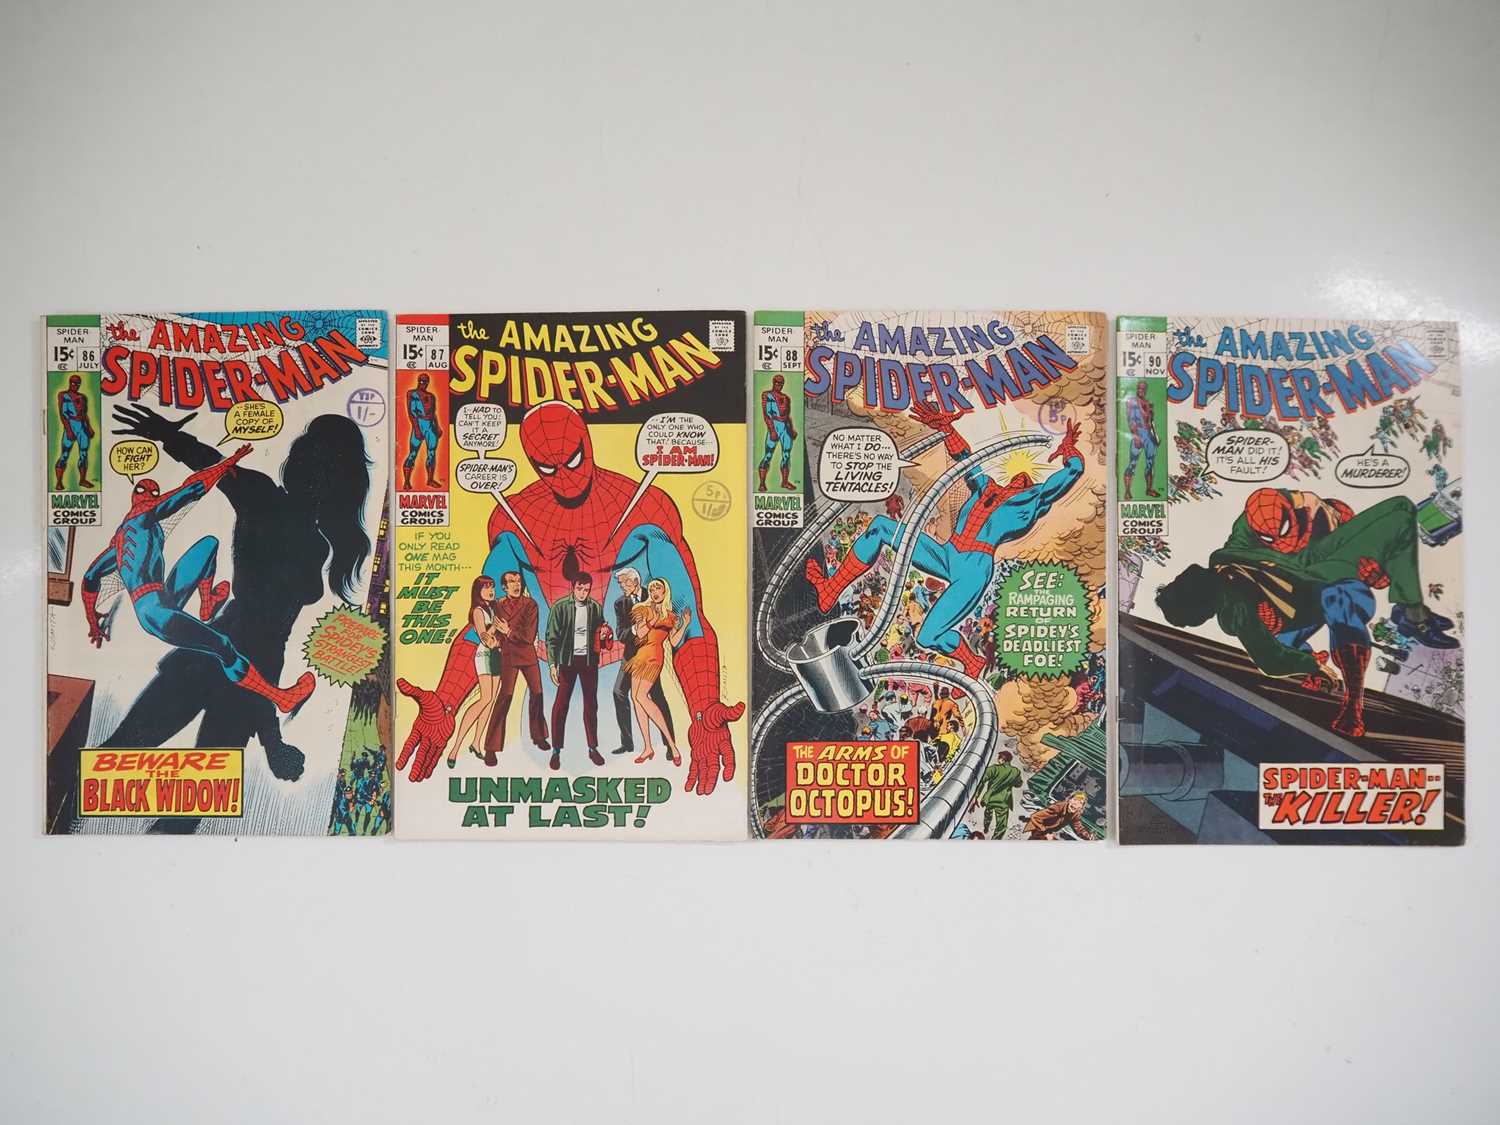 AMAZING SPIDER-MAN #86, 87, 88, 90 (4 in Lot) - (1970 - MARVEL) - Includes the debut of Black